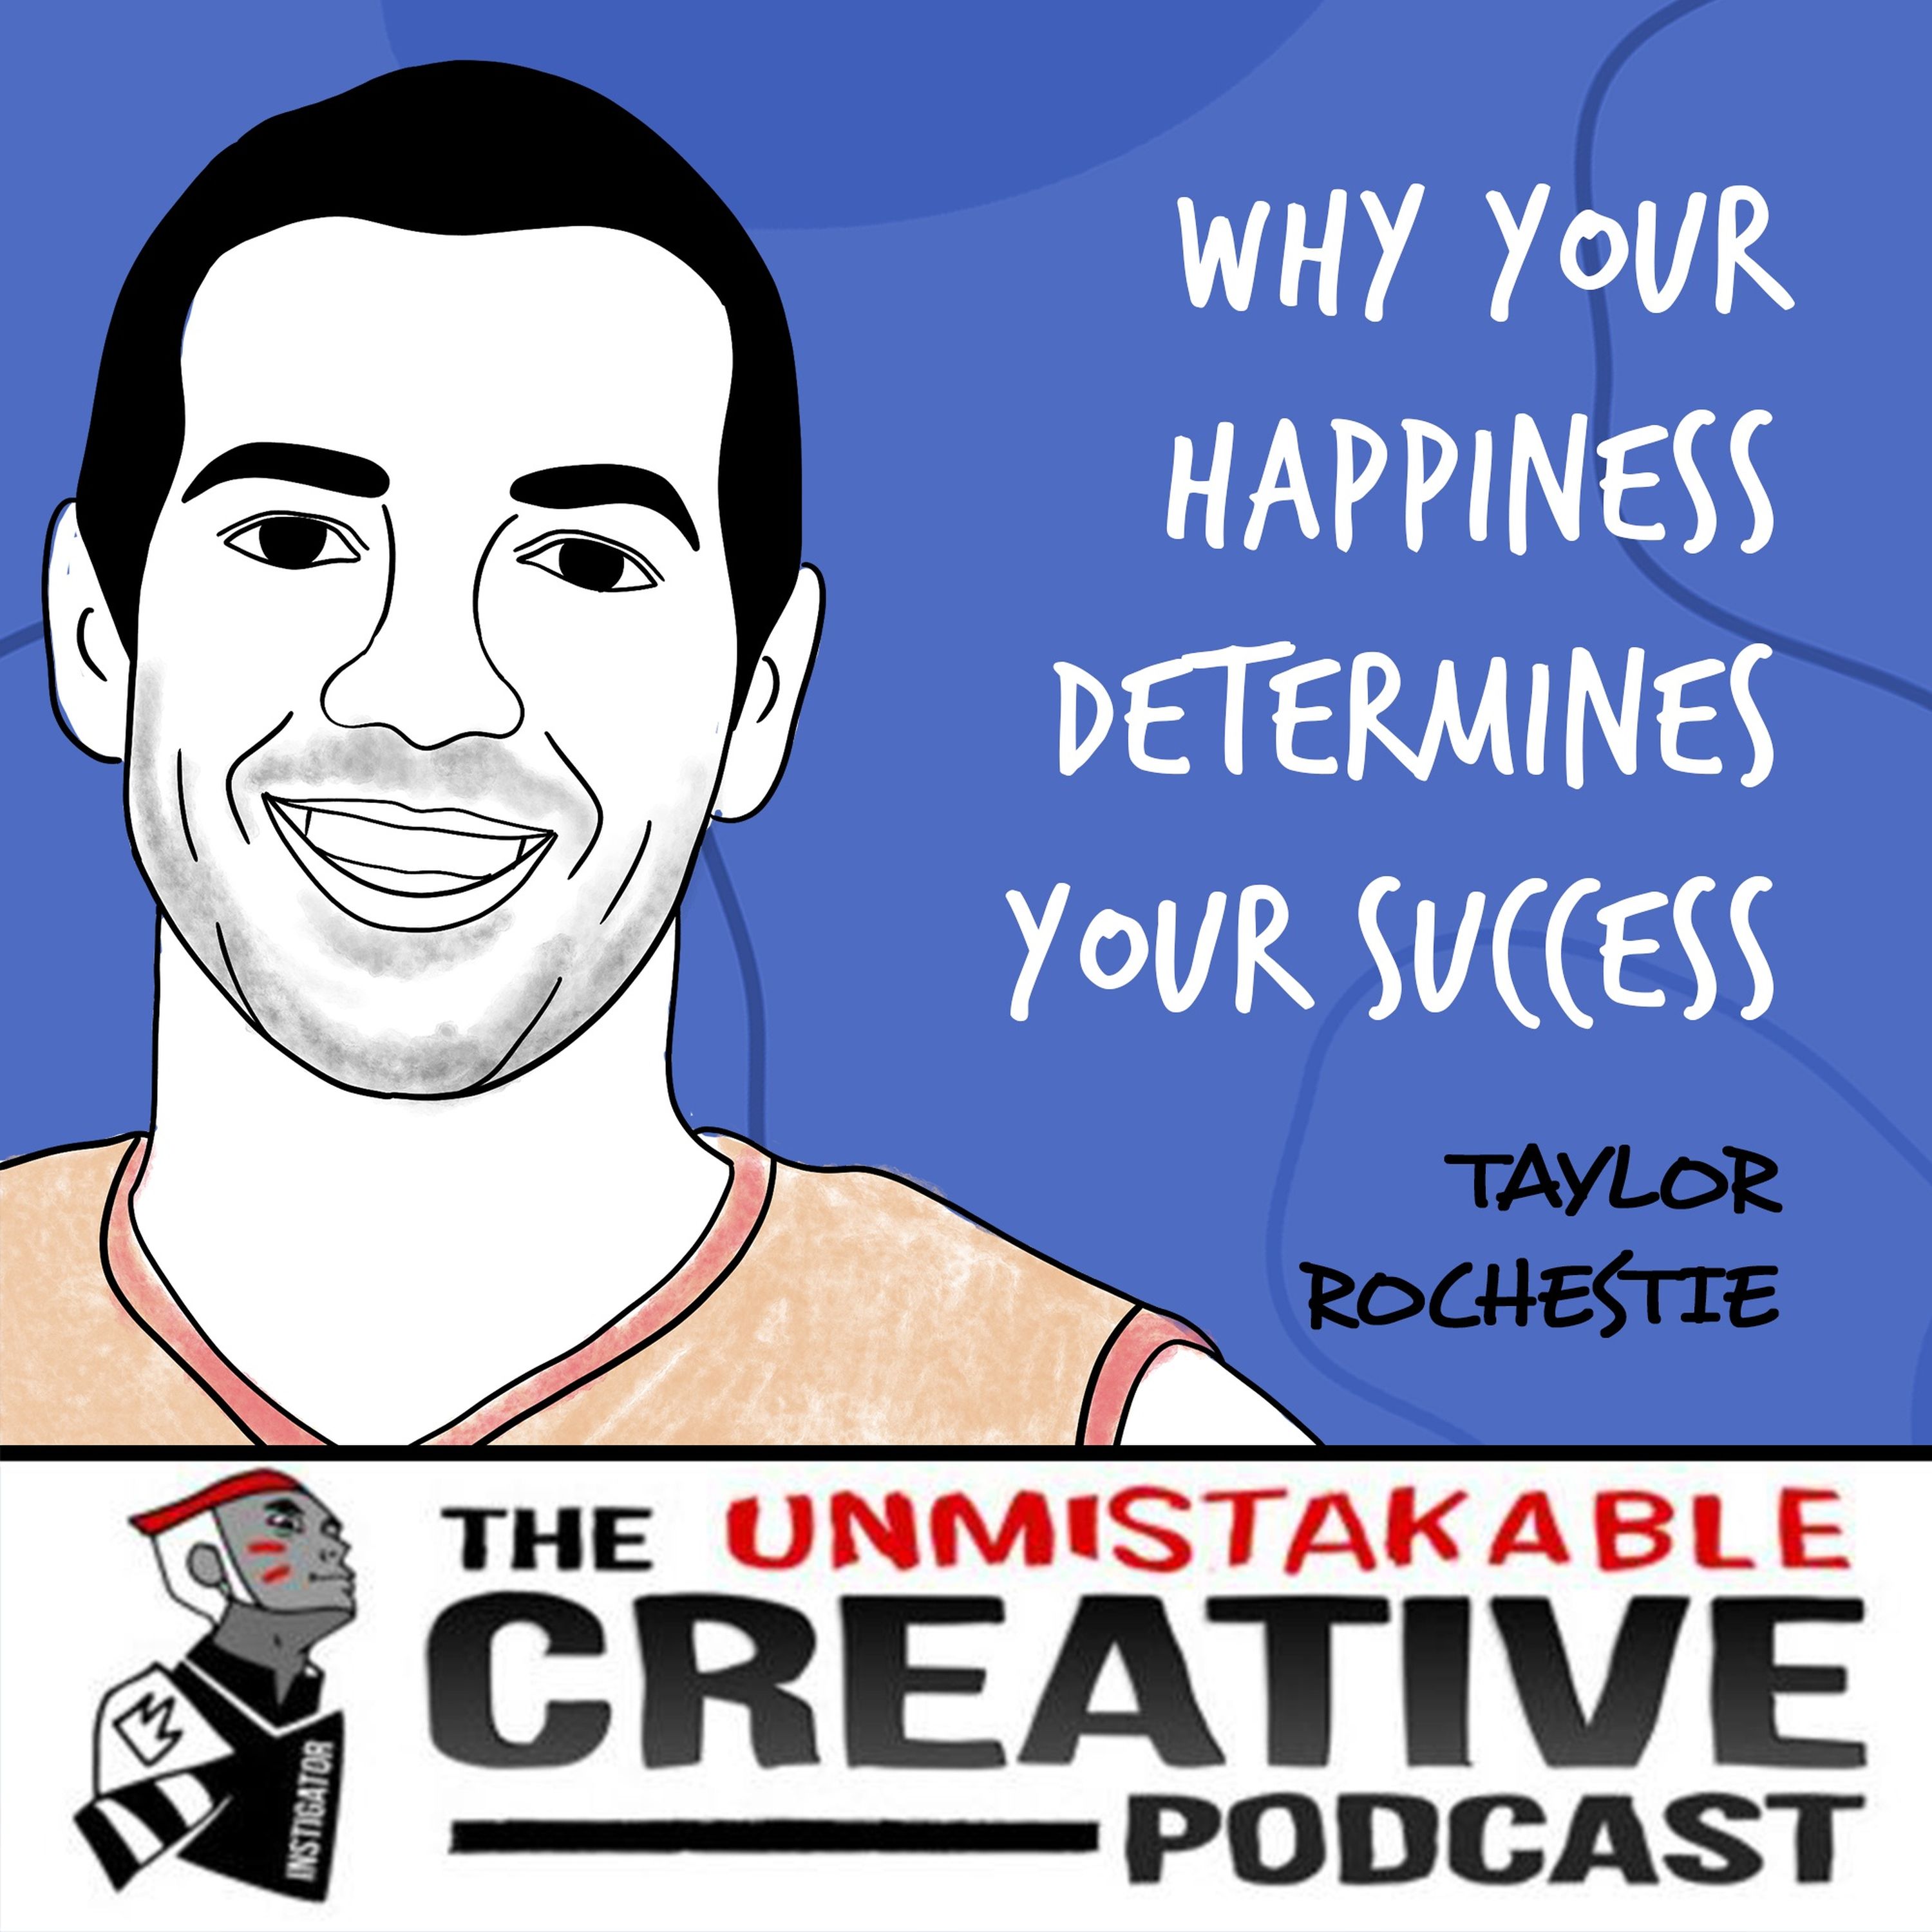 Taylor Rochestie | Why Your Happiness Determines Your Success